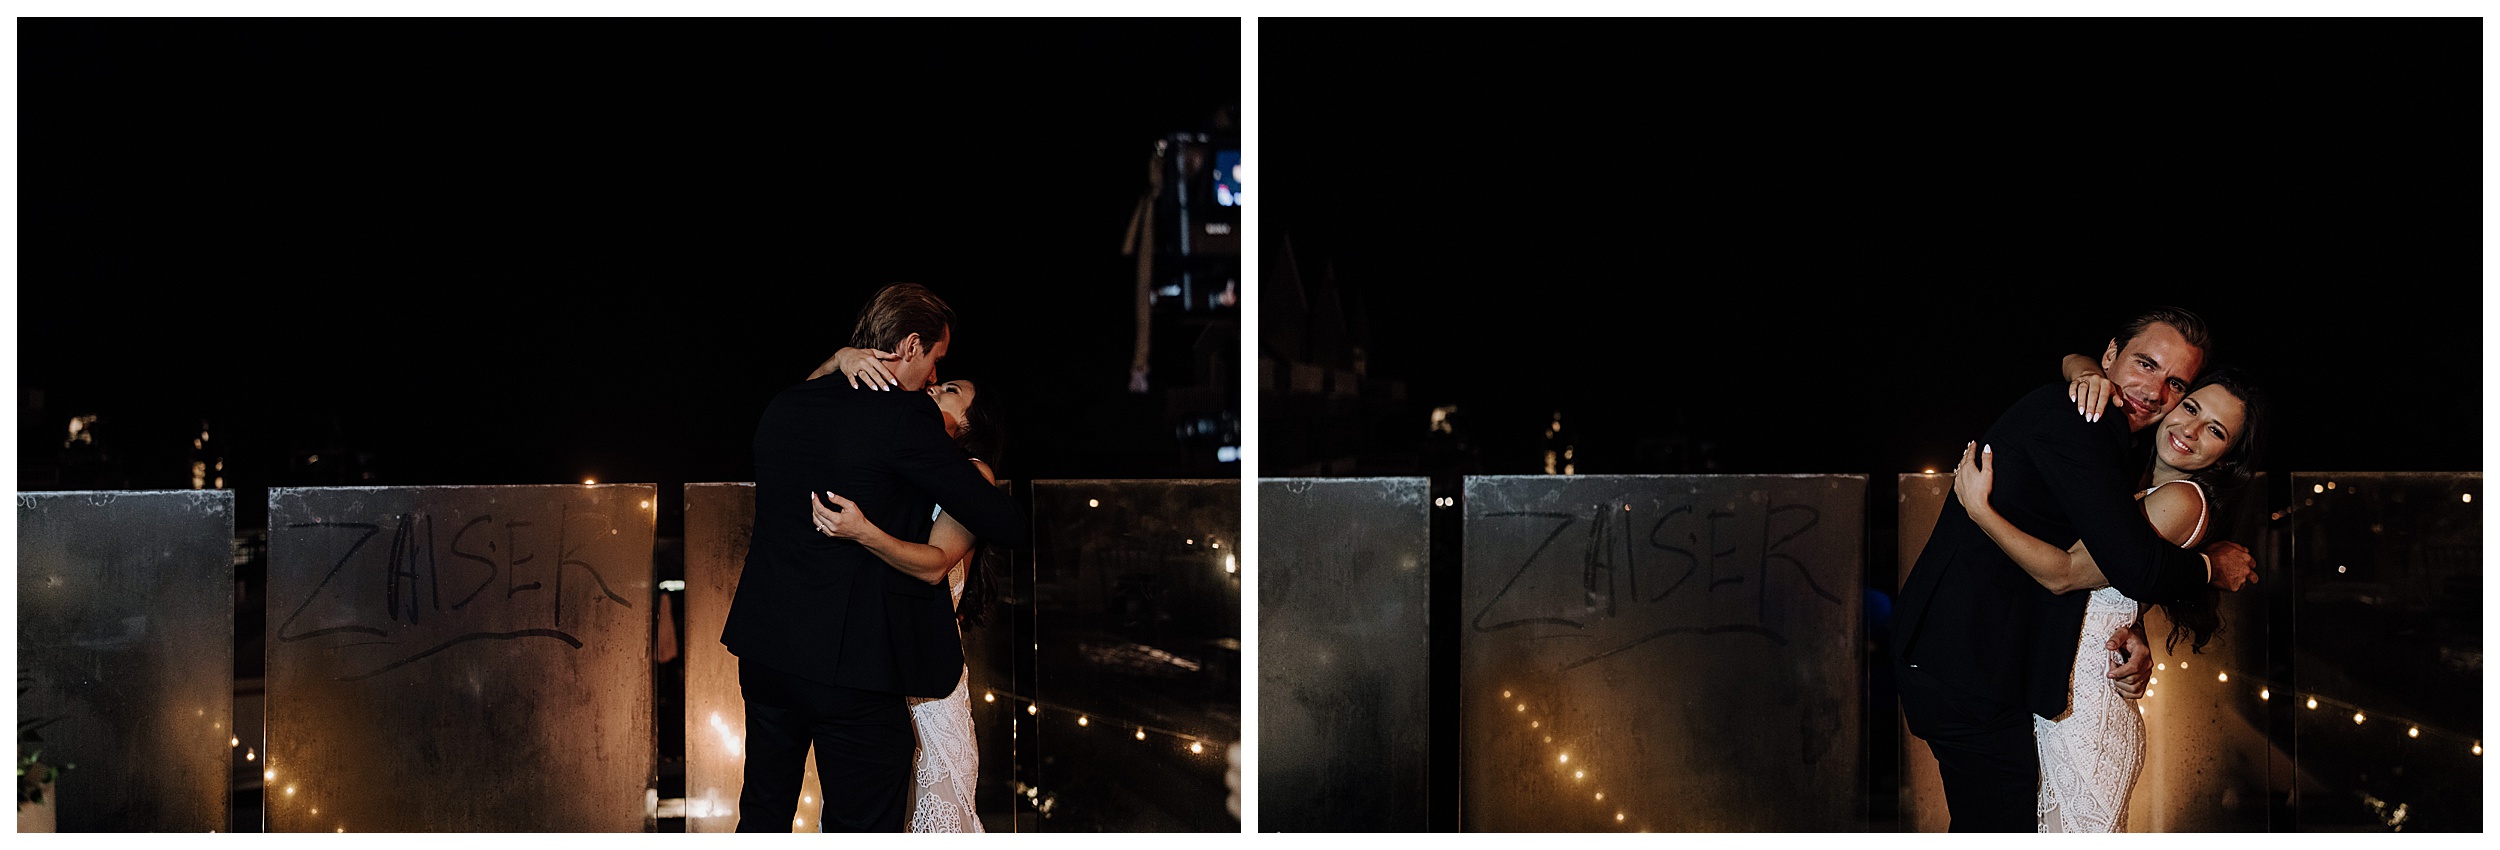 bride and groom kissing, wedding portraits at night